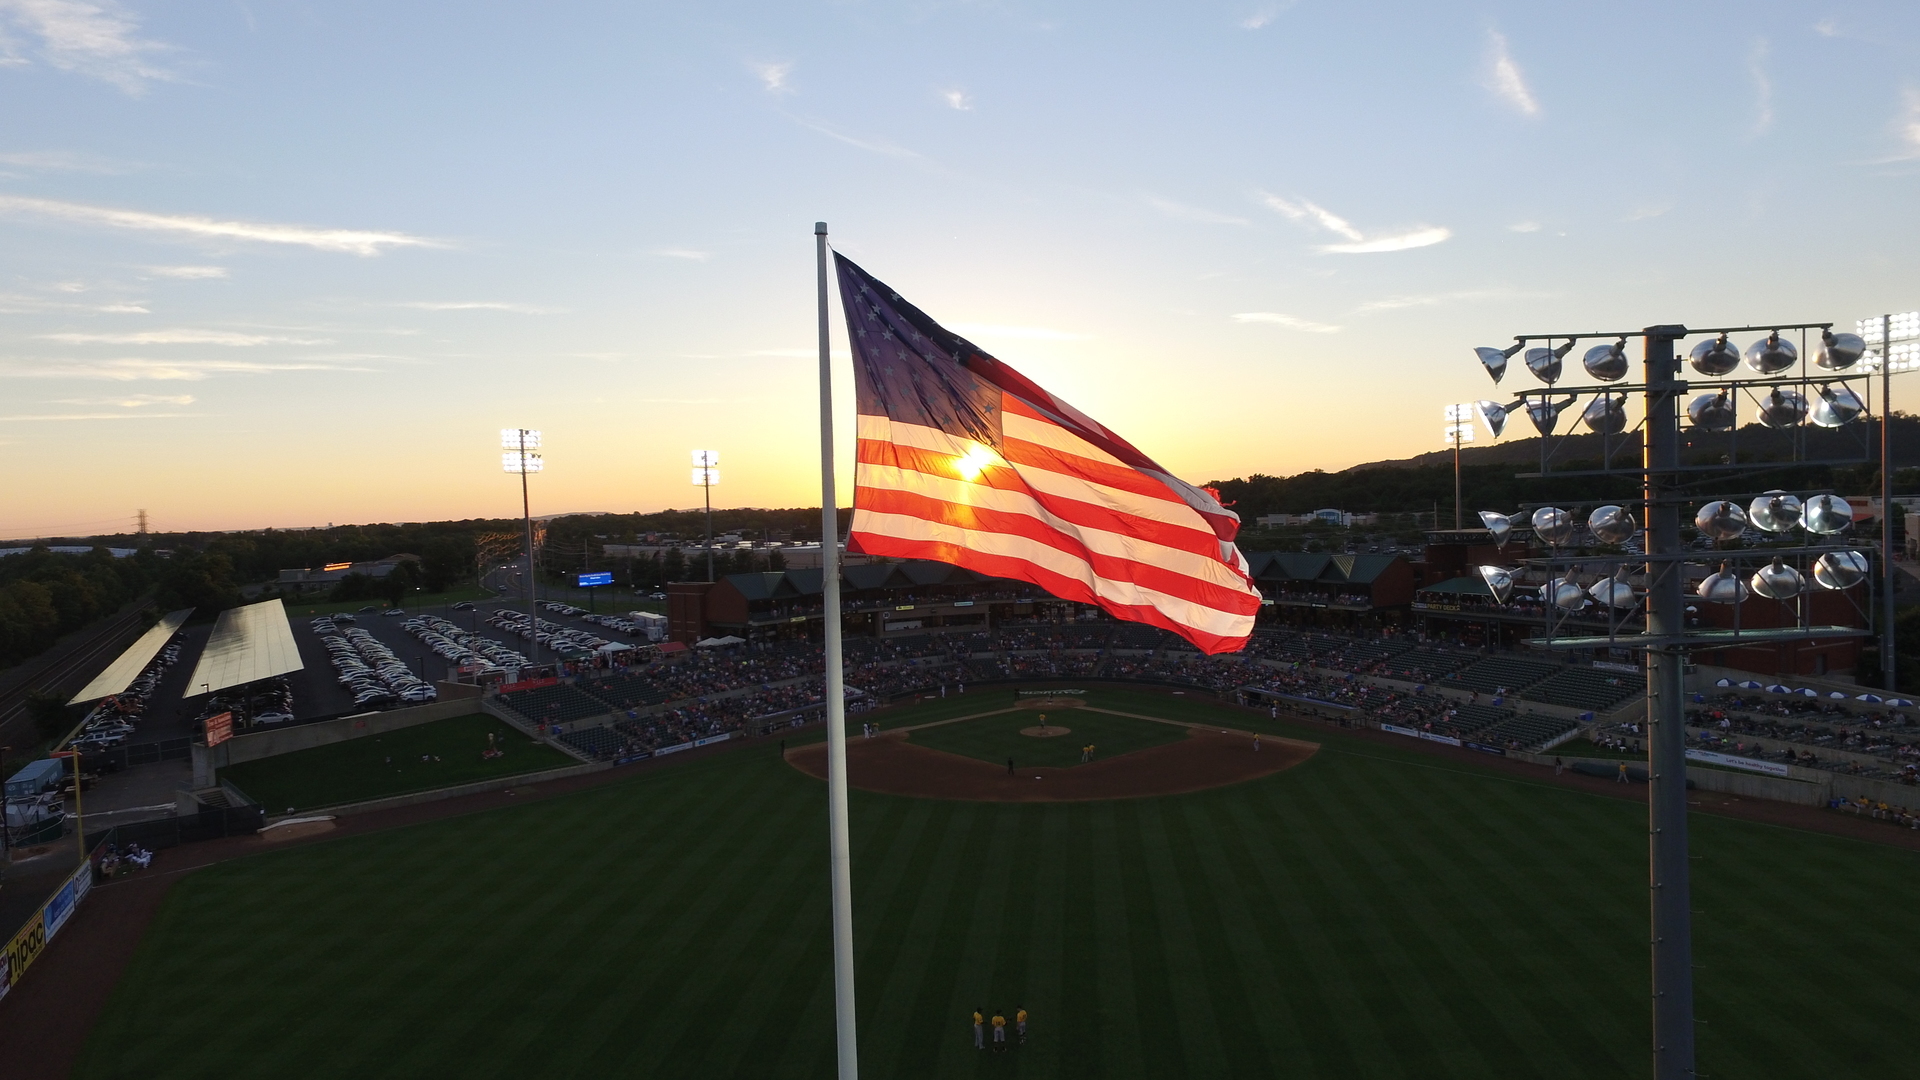 Live Baseball | Somerset Patriots (NYY) vs. New Hampshire Fisher Cats (TOR) - MiLB Double-A, Bridgewater Township, New Jersey, United States